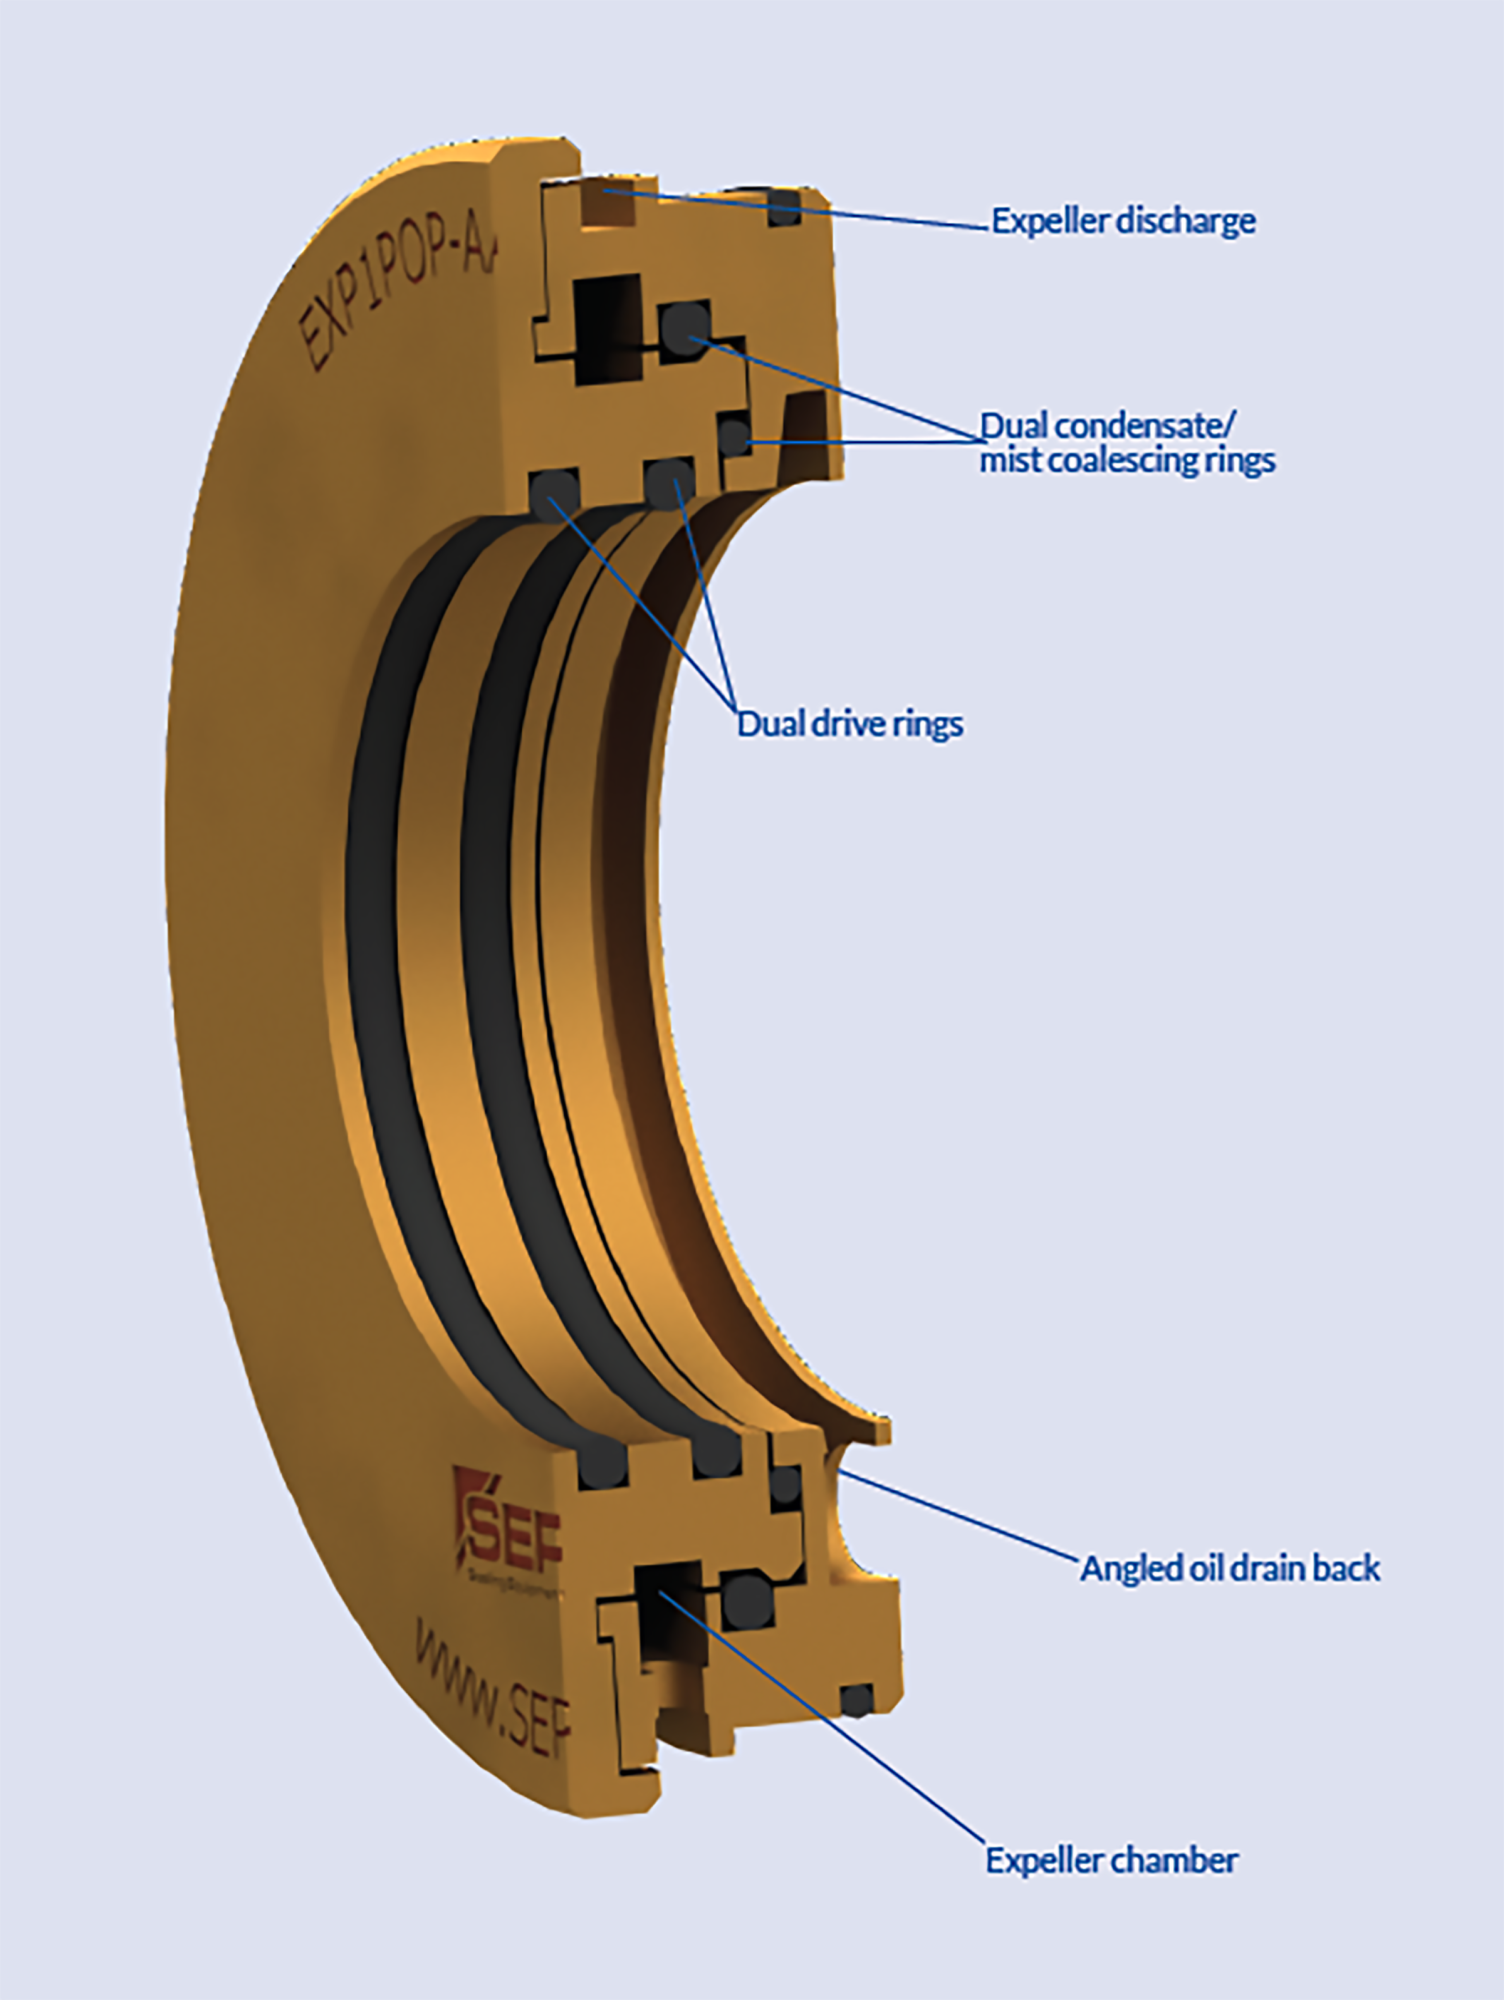 IMAGE 1: Components of the system-focused bearing isolator (Images courtesy of SEPCO)